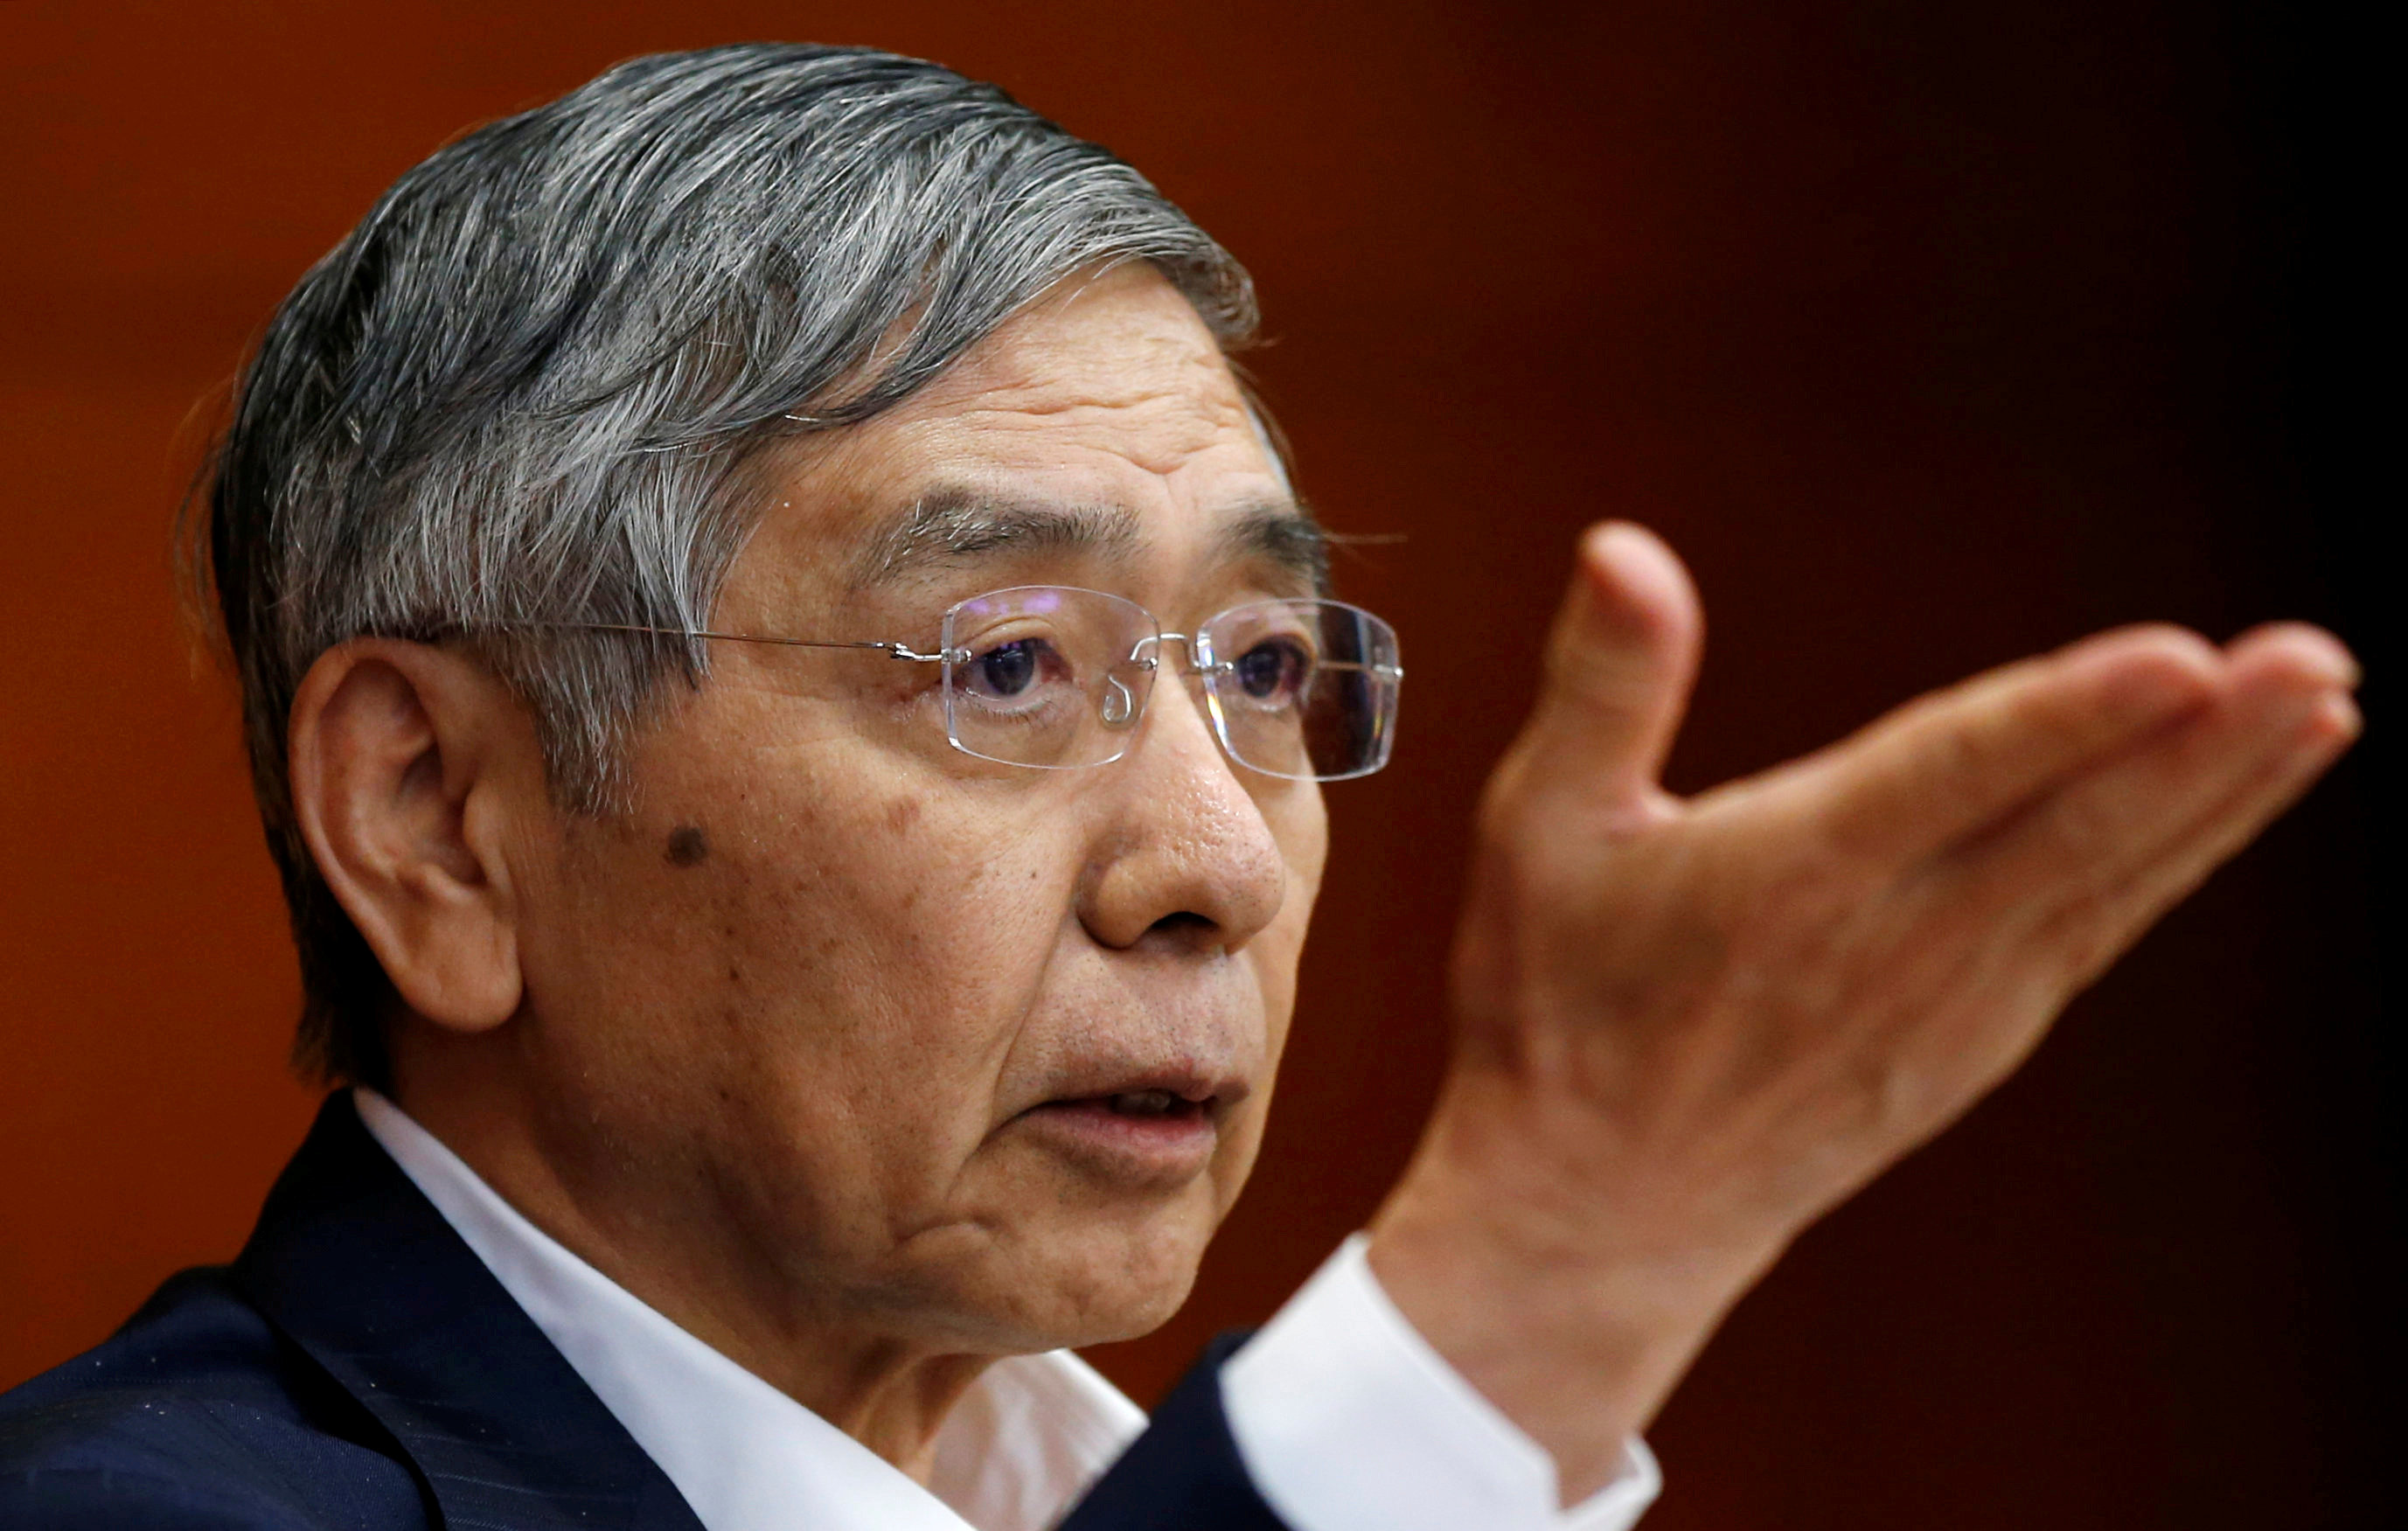 Bank of Japan Governor offers optimism on economy